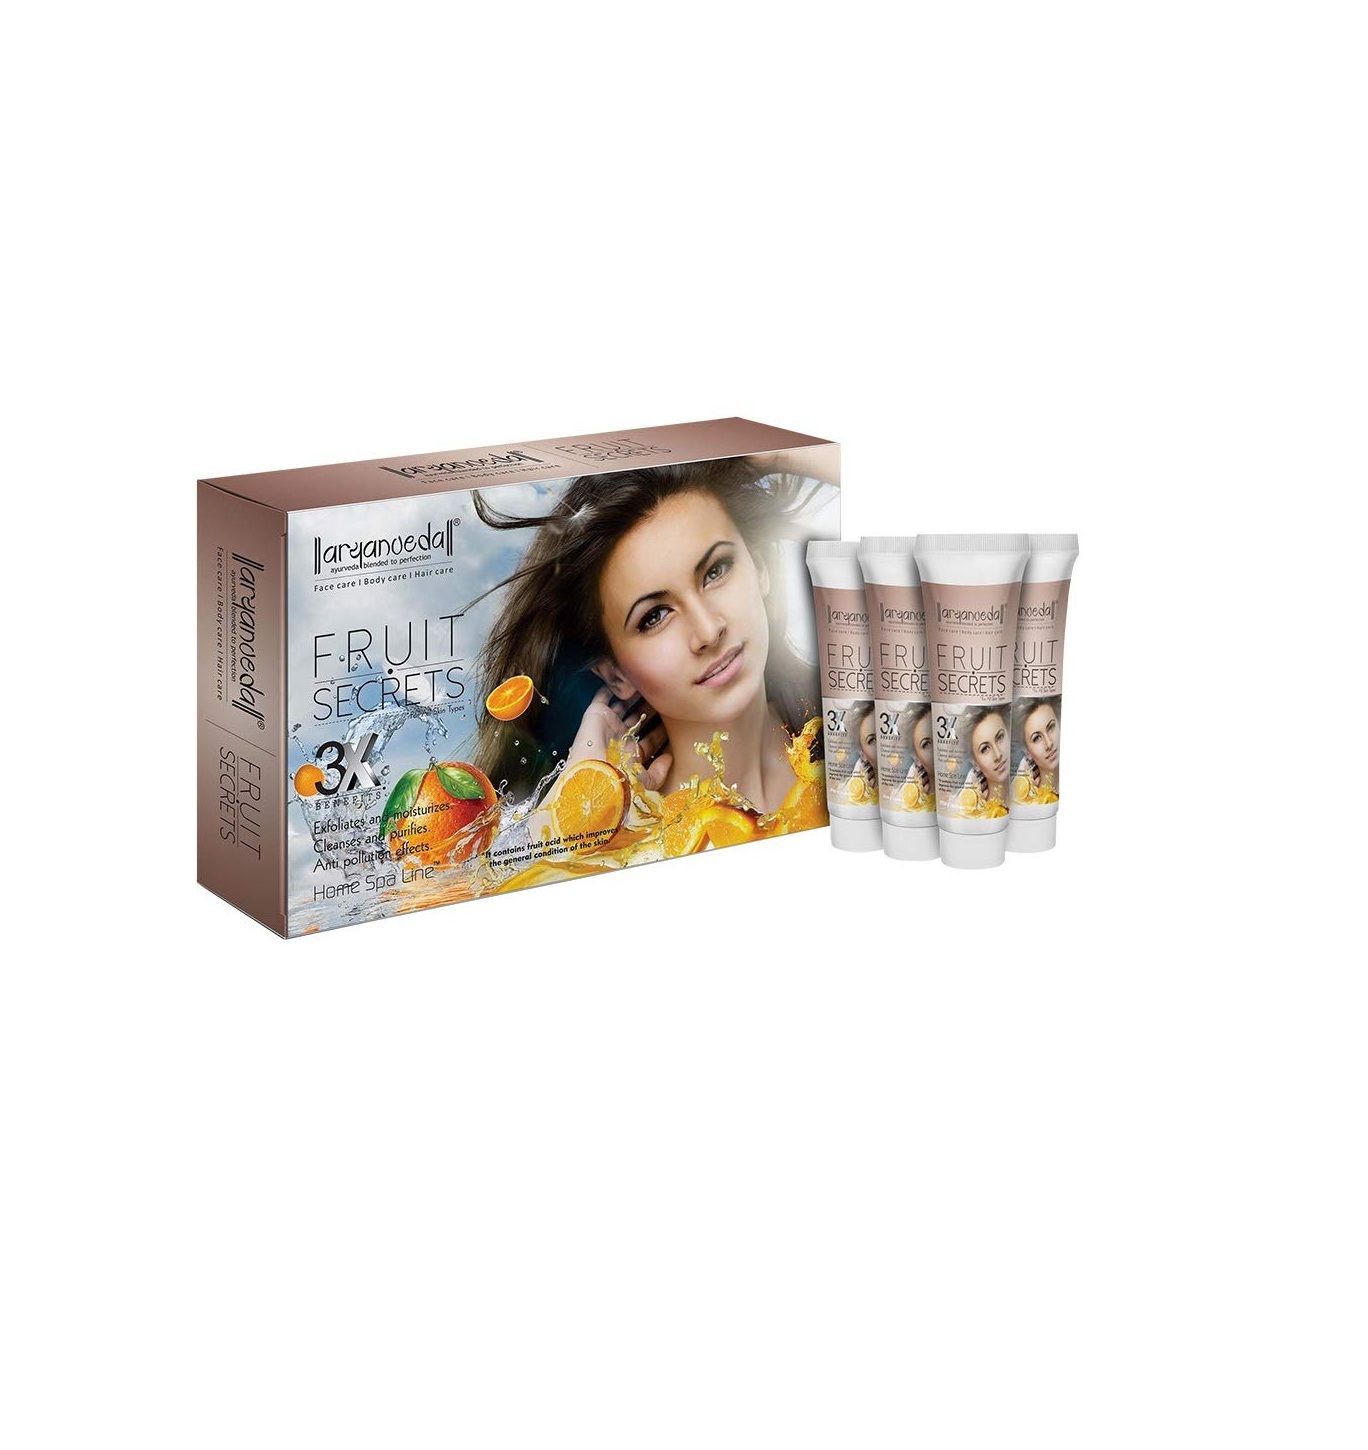 Aryanveda Fruit Secrets 3X Home Spa Kit and Get Free Gift Worth Rs.50